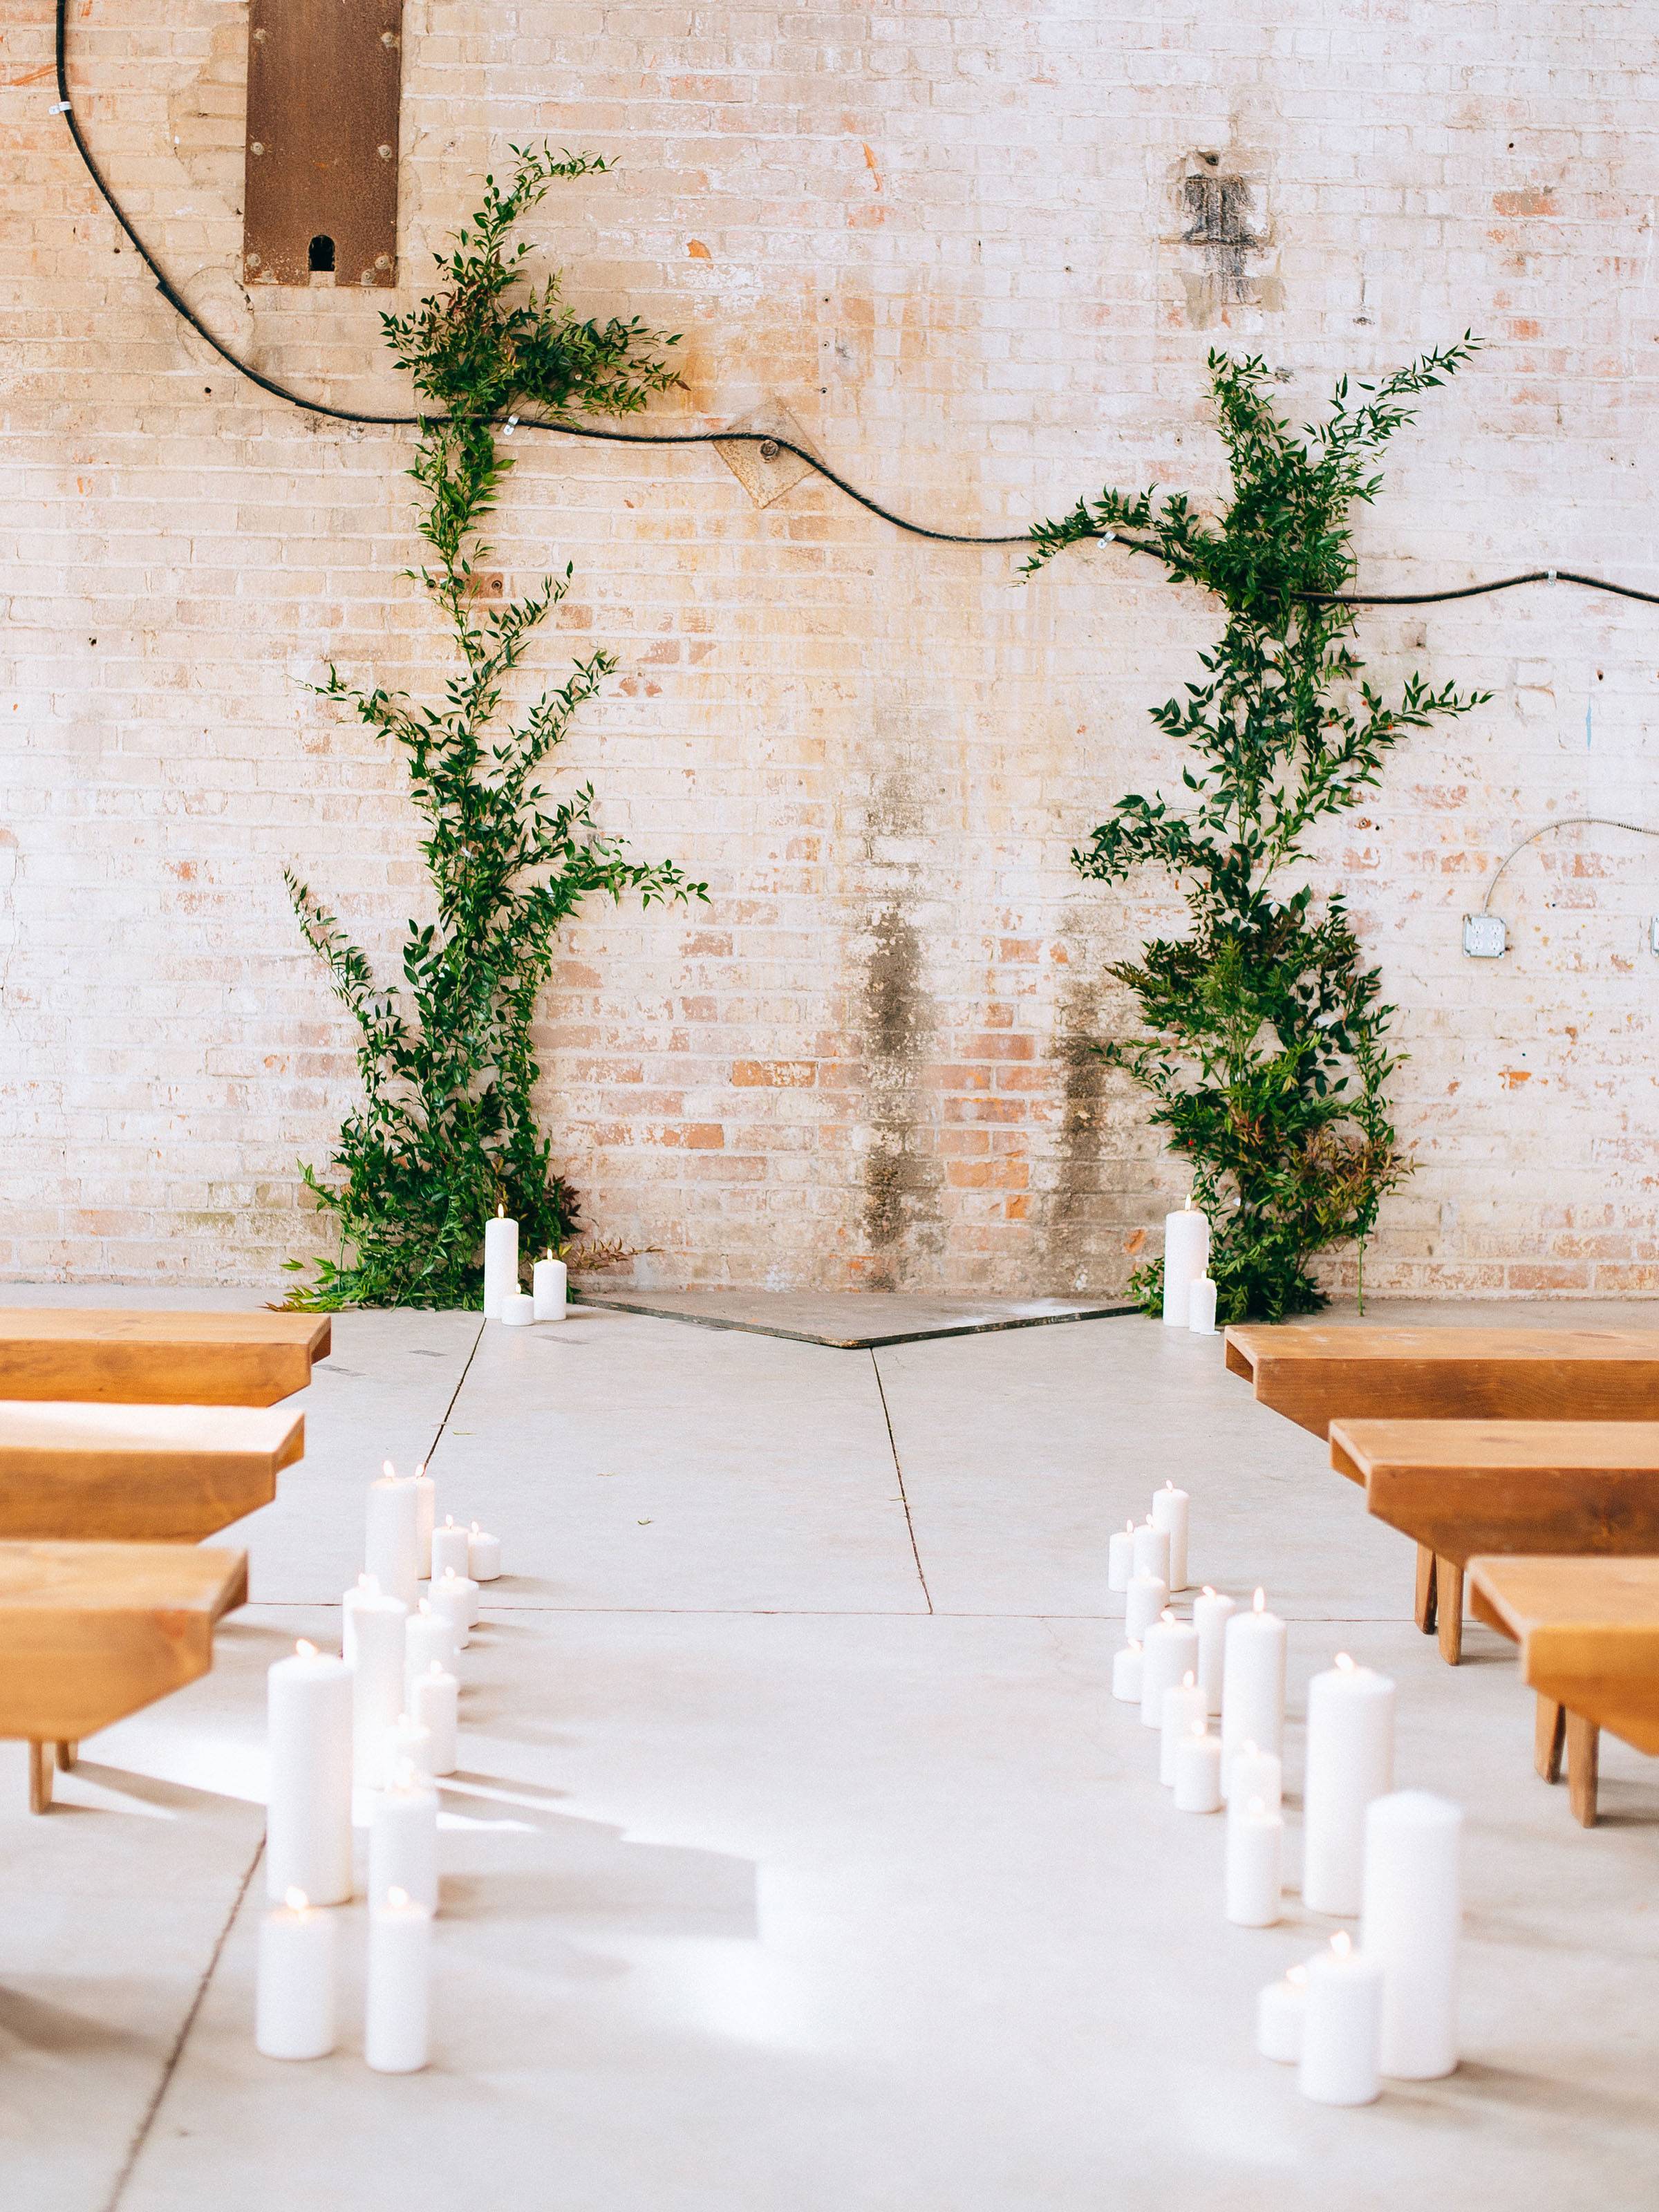 Ceremony aisle flanked with white pillar candles and wood benches and two columns of greenery